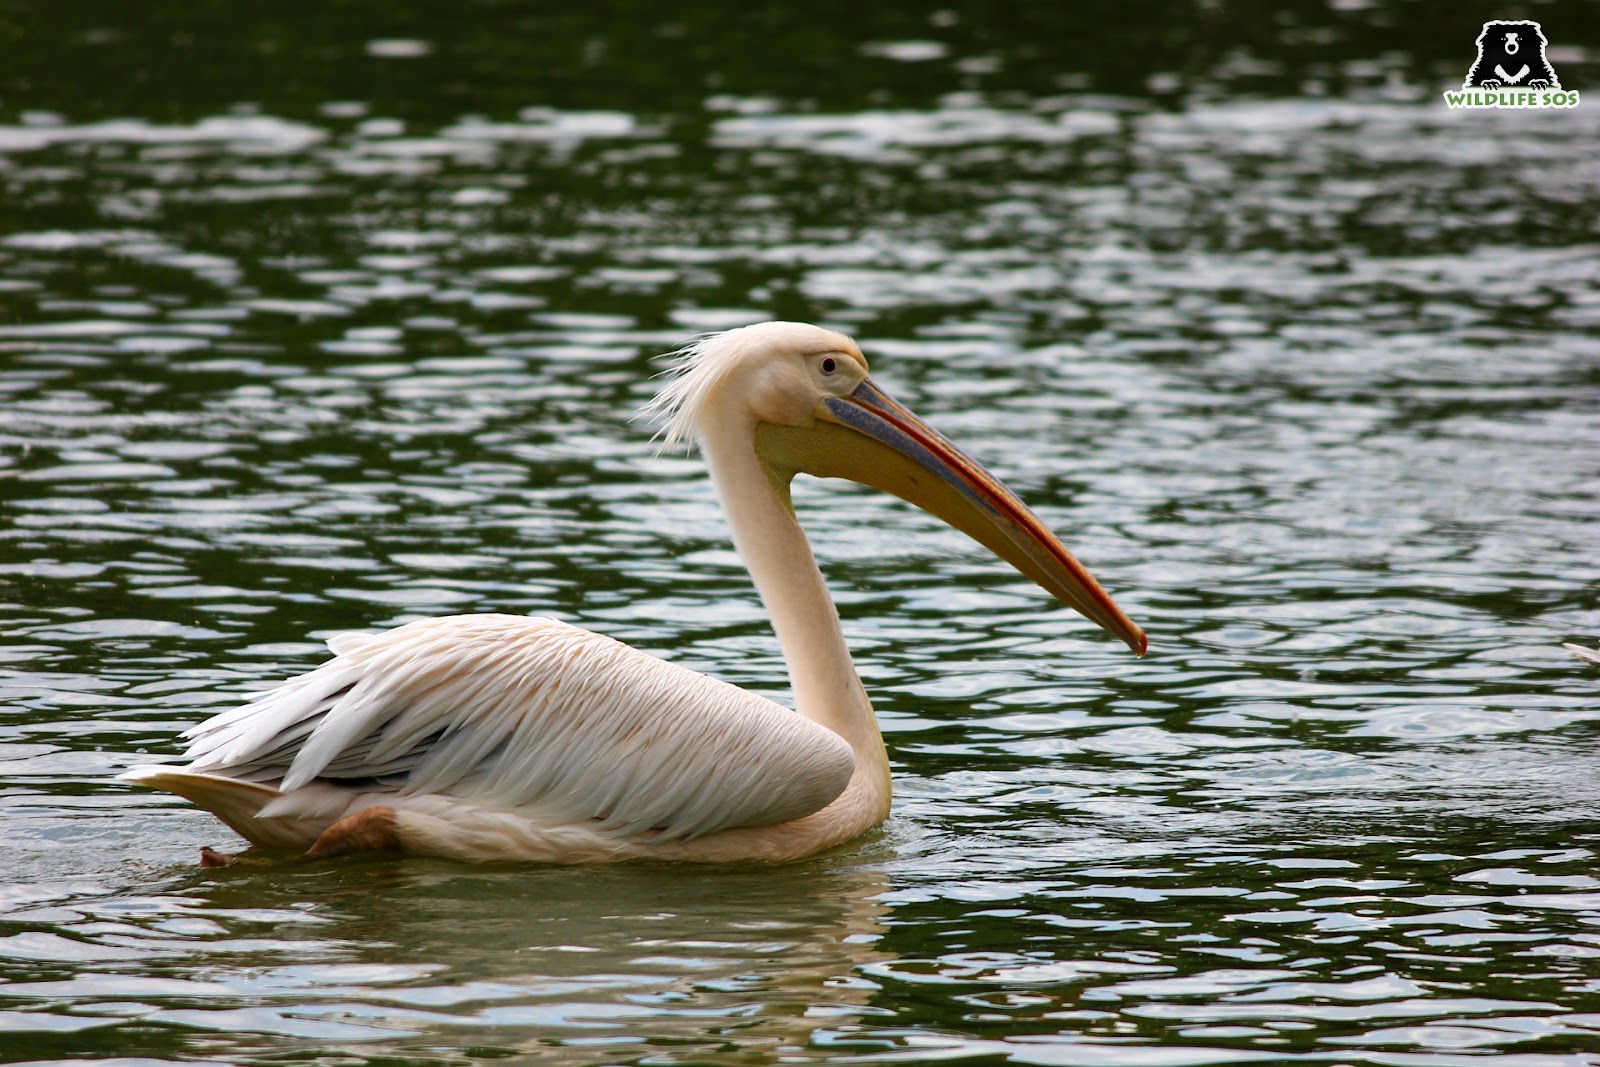 Greater White pelican is a migratory bird